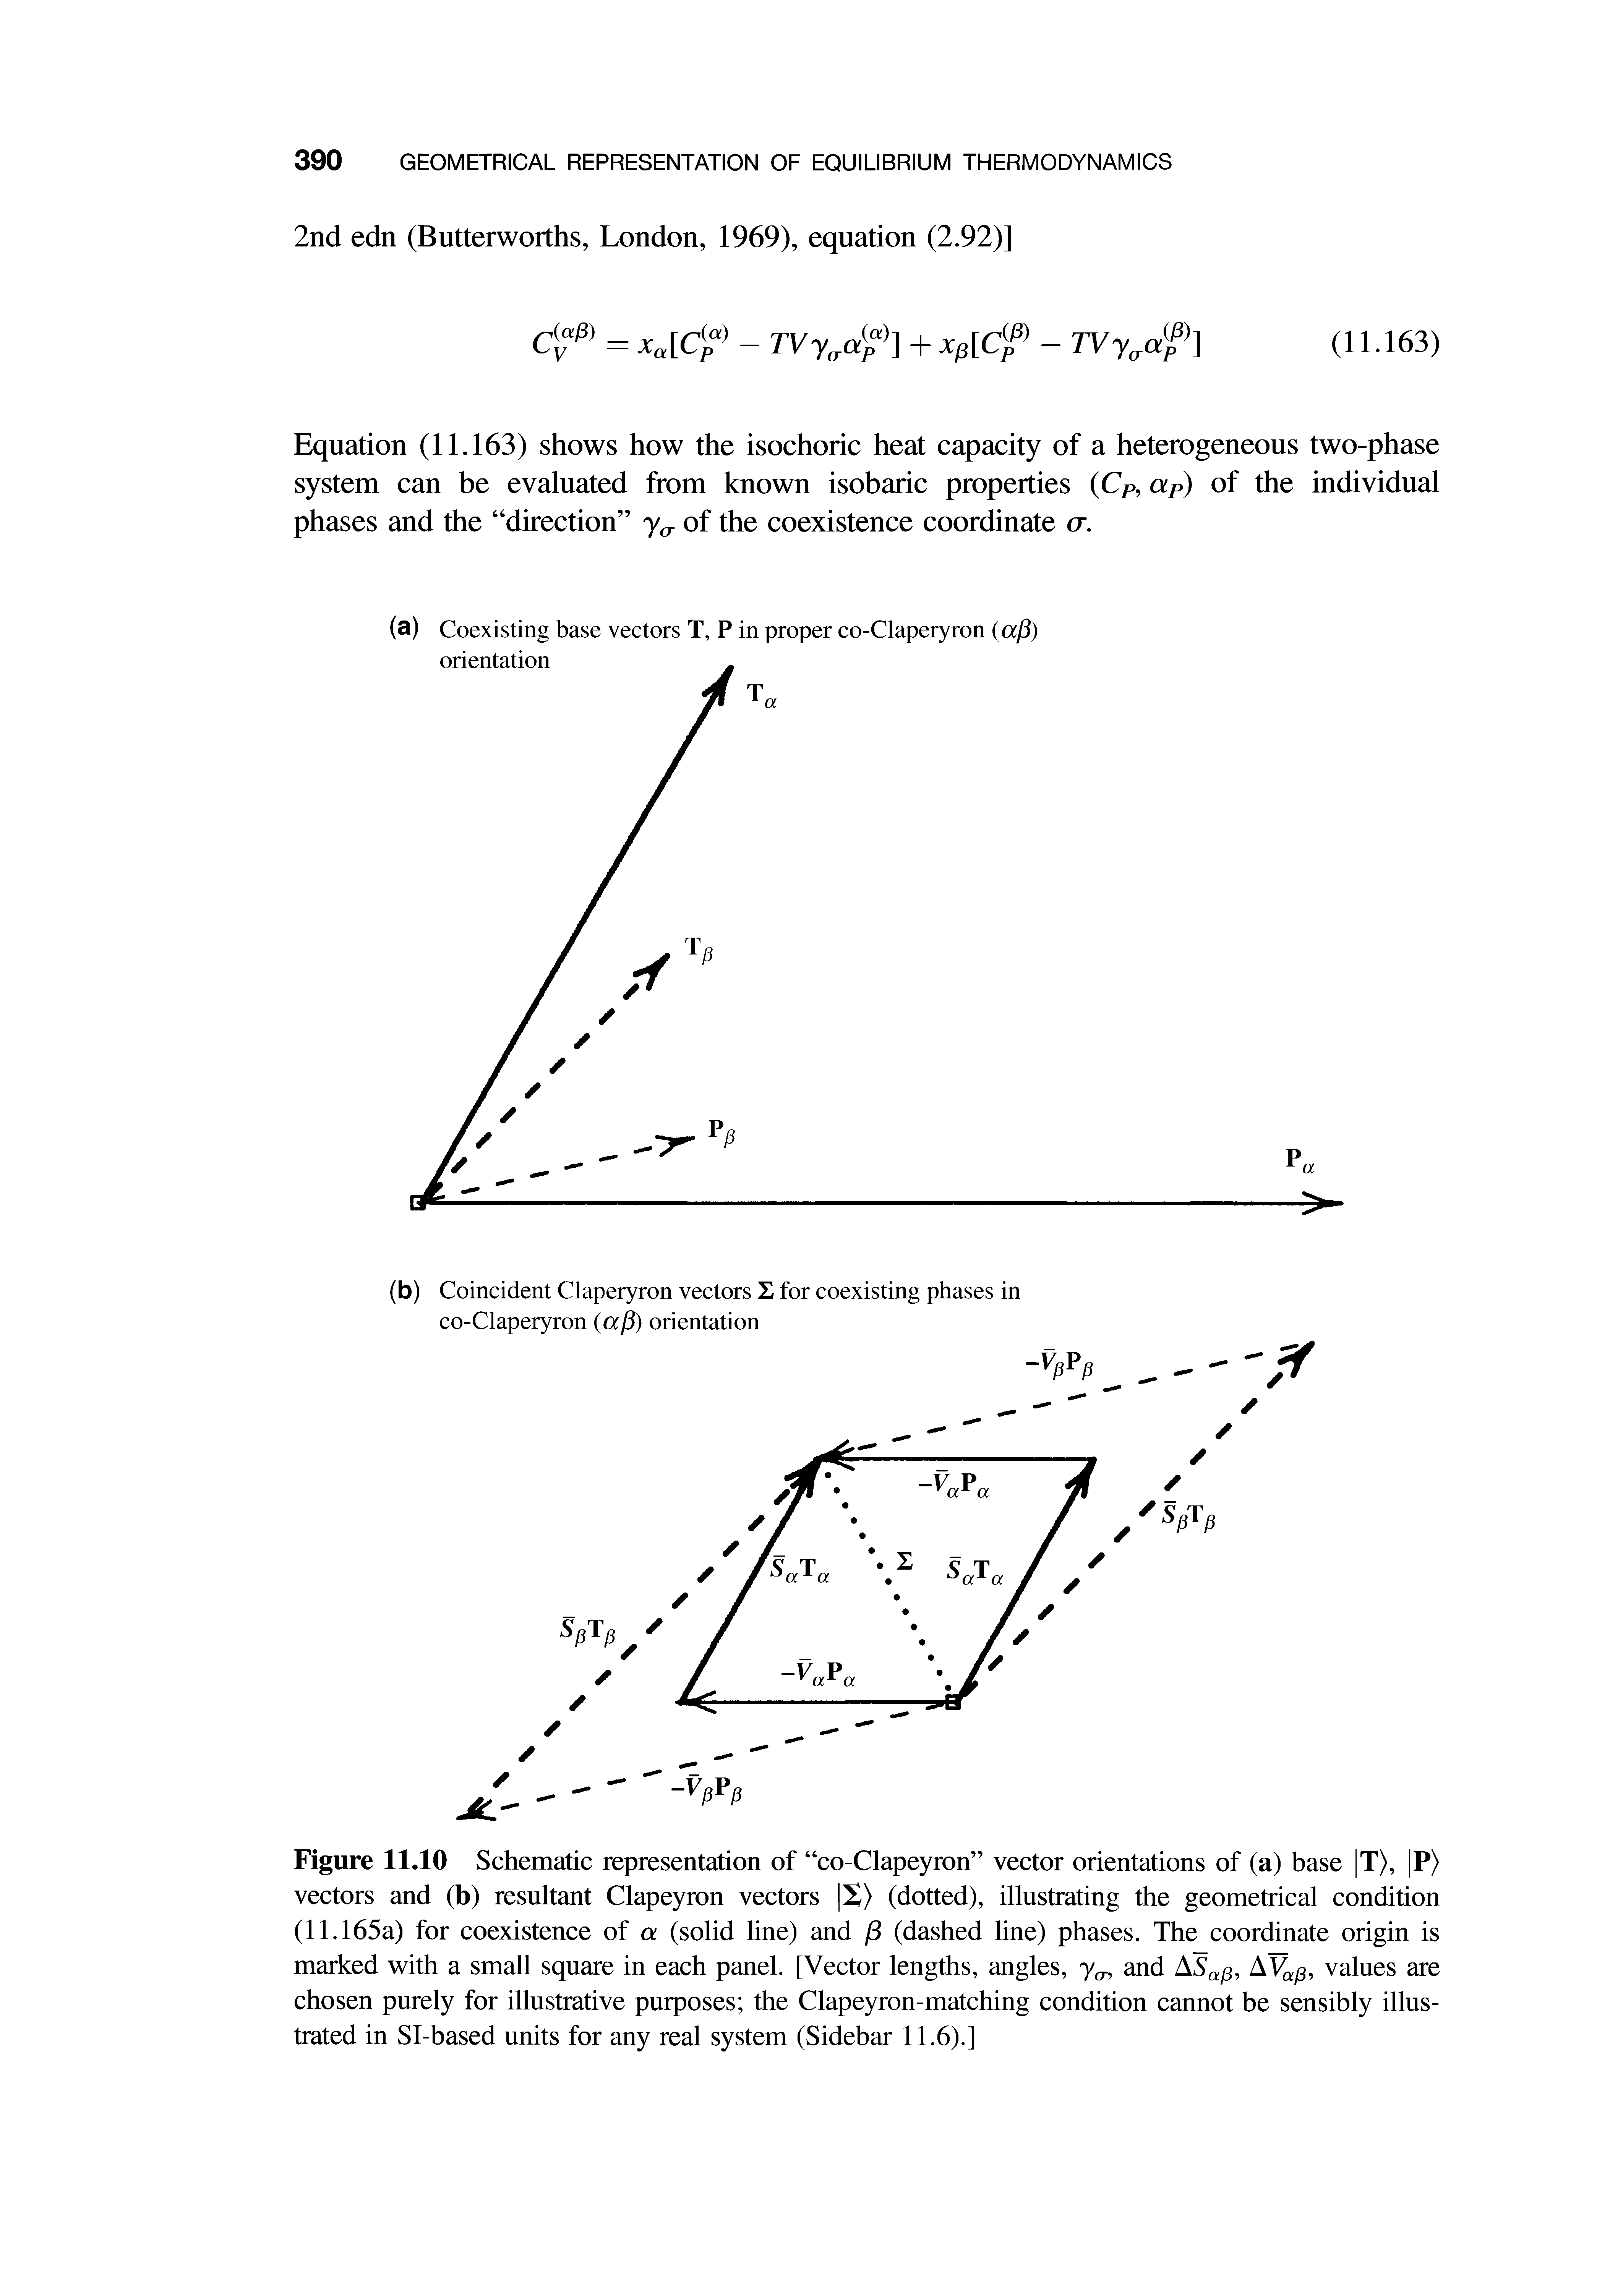 Figure 11.10 Schematic representation of co-Clapeyron vector orientations of (a) base T), P) vectors and (b) resultant Clapeyron vectors X) (dotted), illustrating the geometrical condition (11.165a) for coexistence of a (solid line) and /3 (dashed line) phases. The coordinate origin is marked with a small square in each panel. [Vector lengths, angles, ya, and ASap, AVap, values are chosen purely for illustrative purposes the Clapeyron-matching condition cannot be sensibly illustrated in Si-based units for any real system (Sidebar 11.6).]...